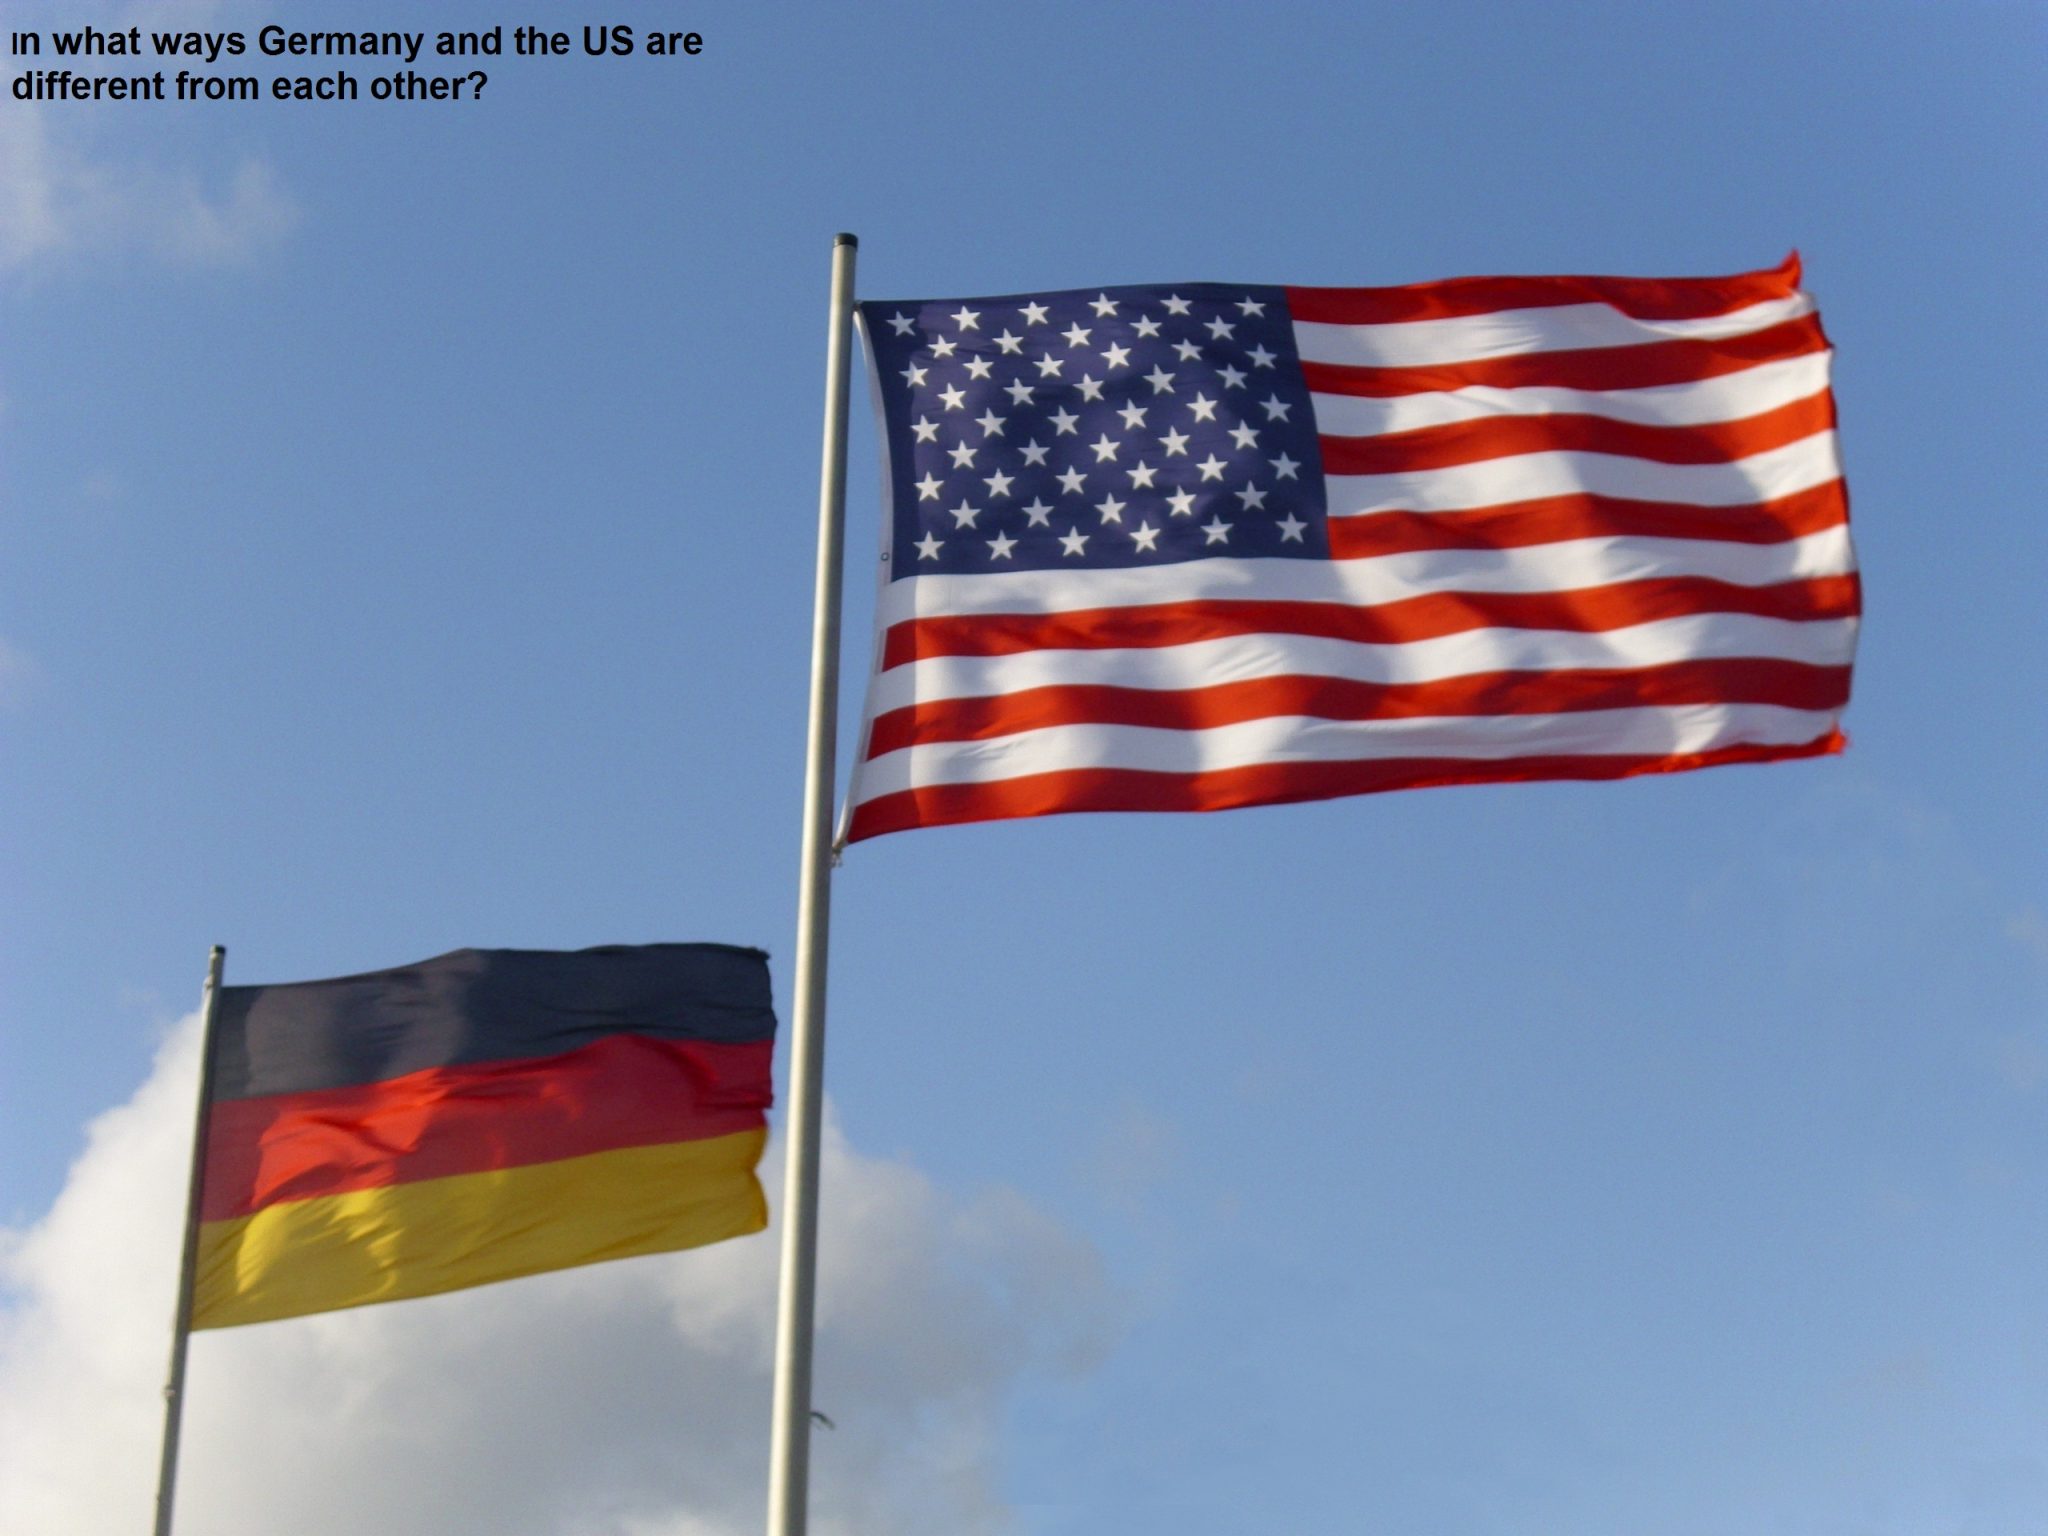 In what ways Germany and the US are different from each other?